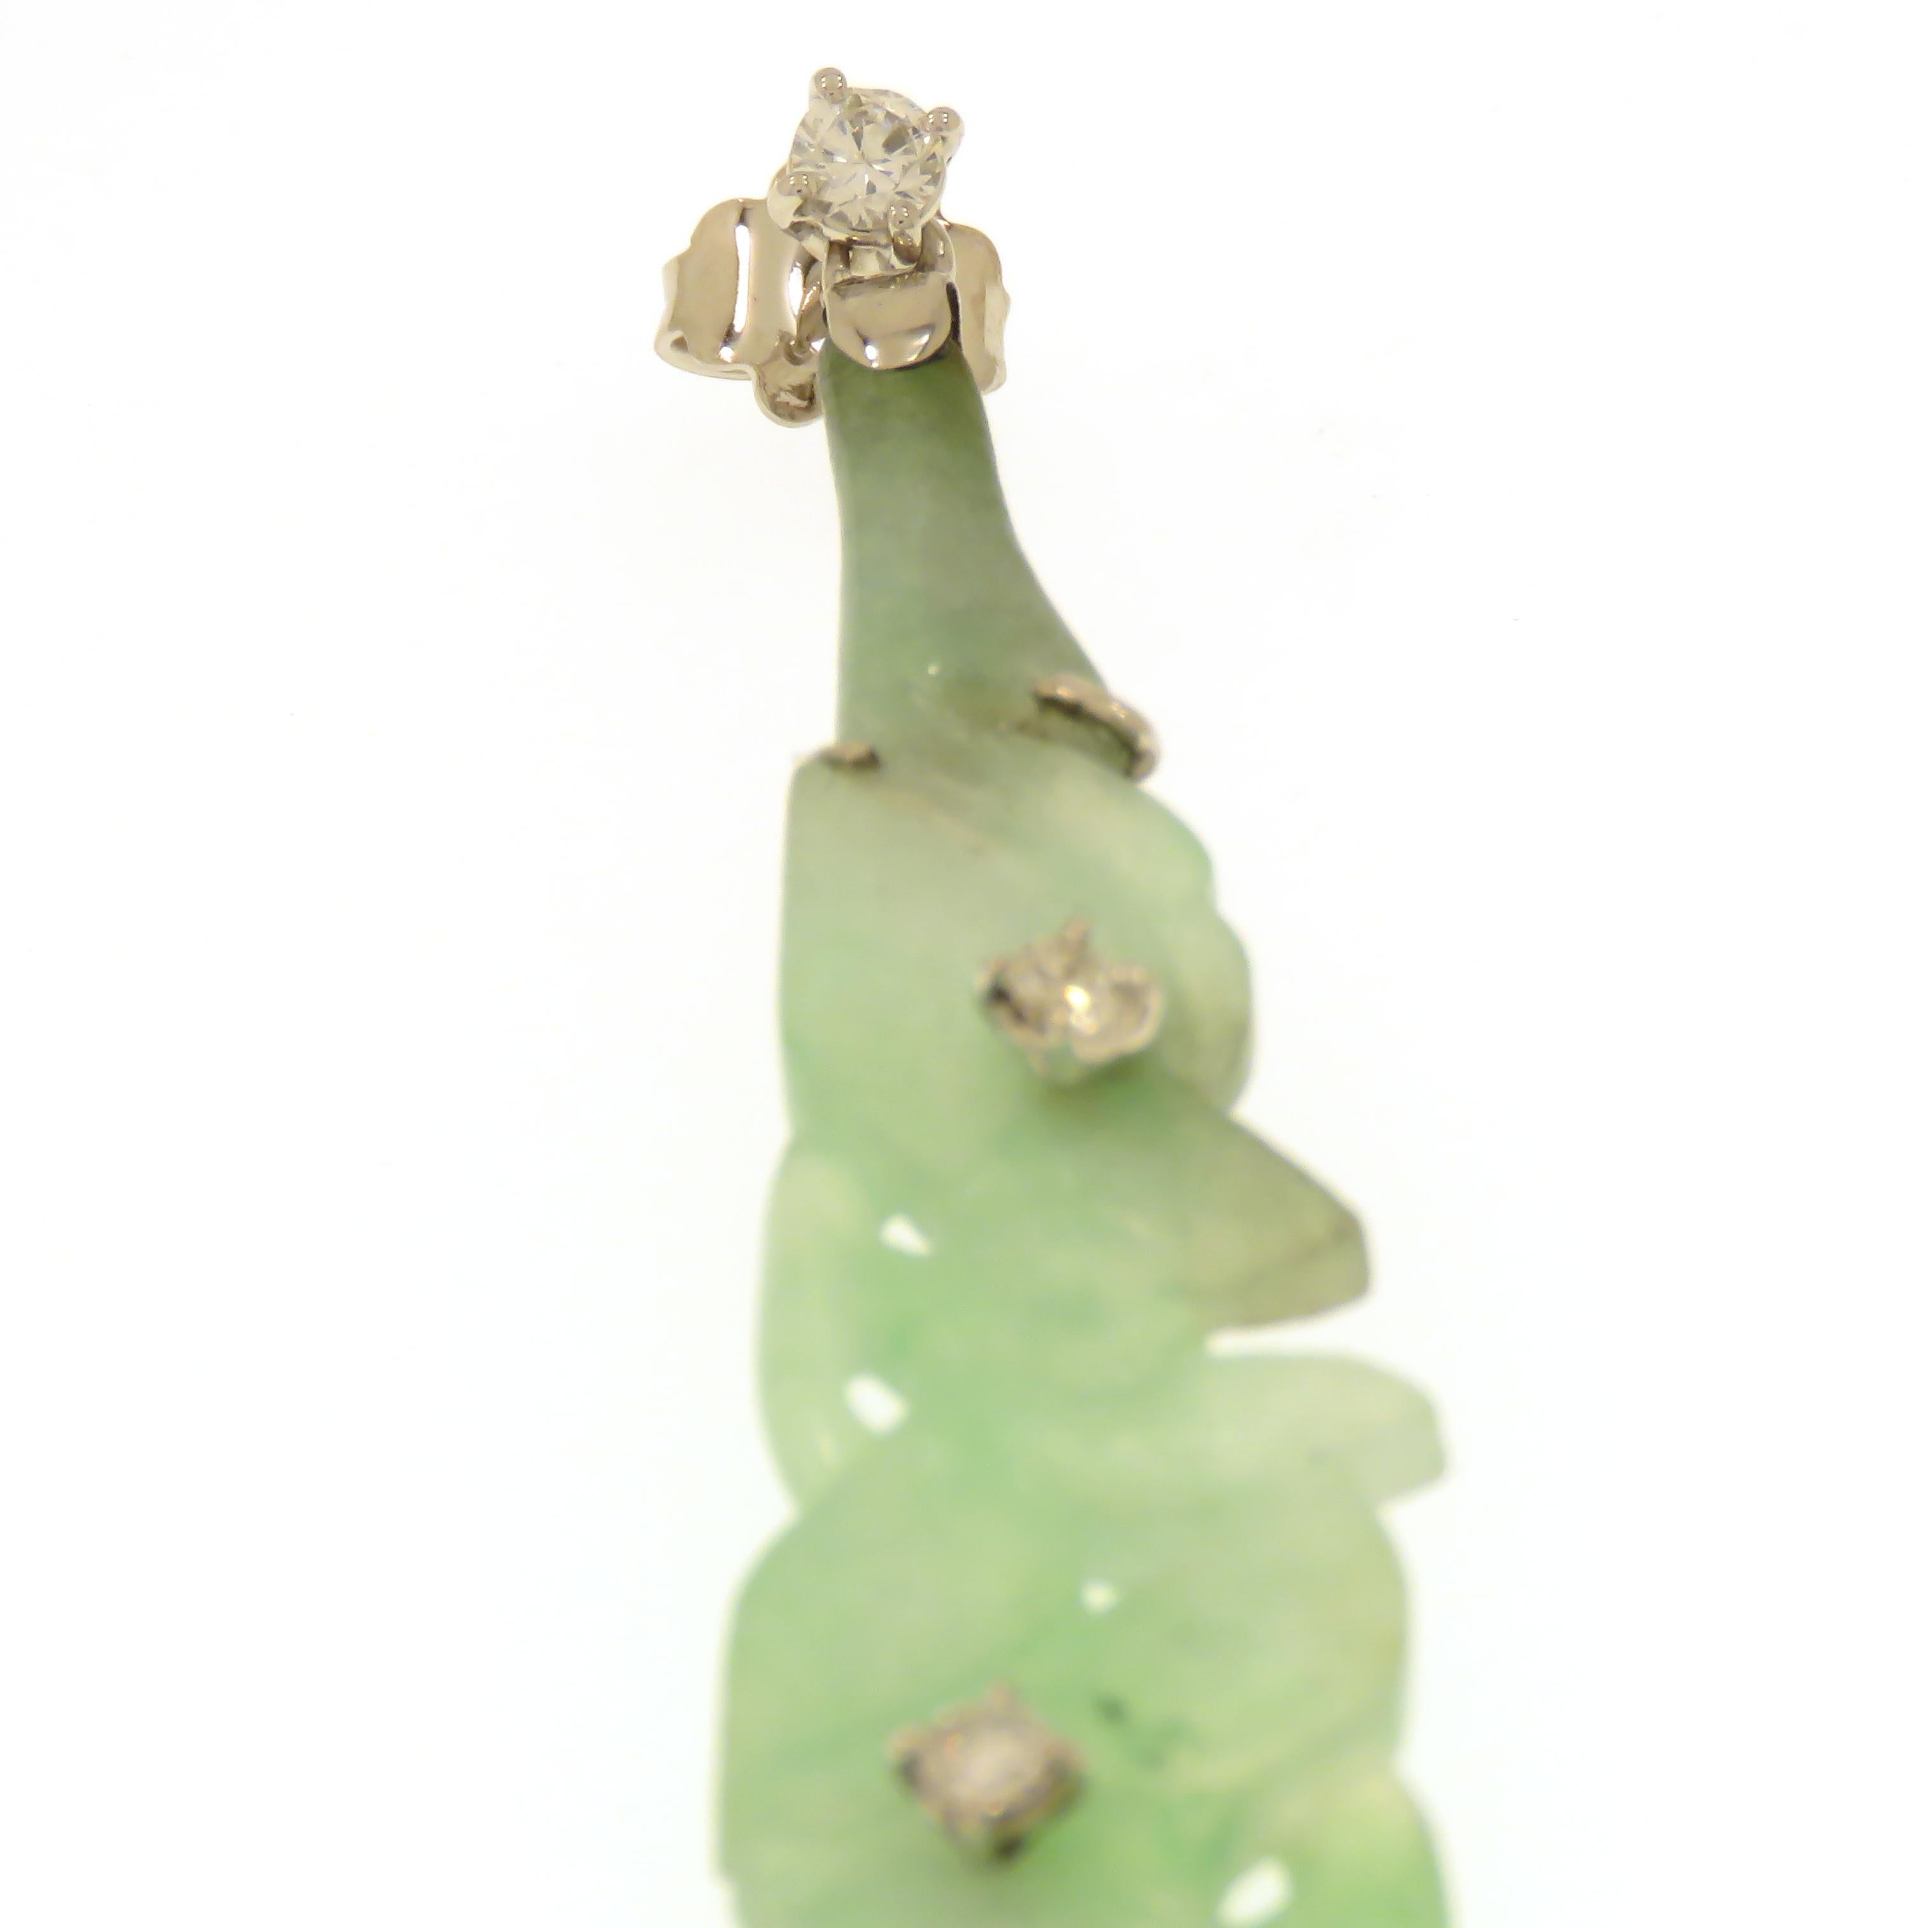 Lovely single long one sided earring featuring a beatiful engraved floral motif in natural green jade. Embellished by three brilliant cut diamonds 0.30 ctw and set in 18 karat white gold, handmade to fit the outline of the jade perfectly. The length